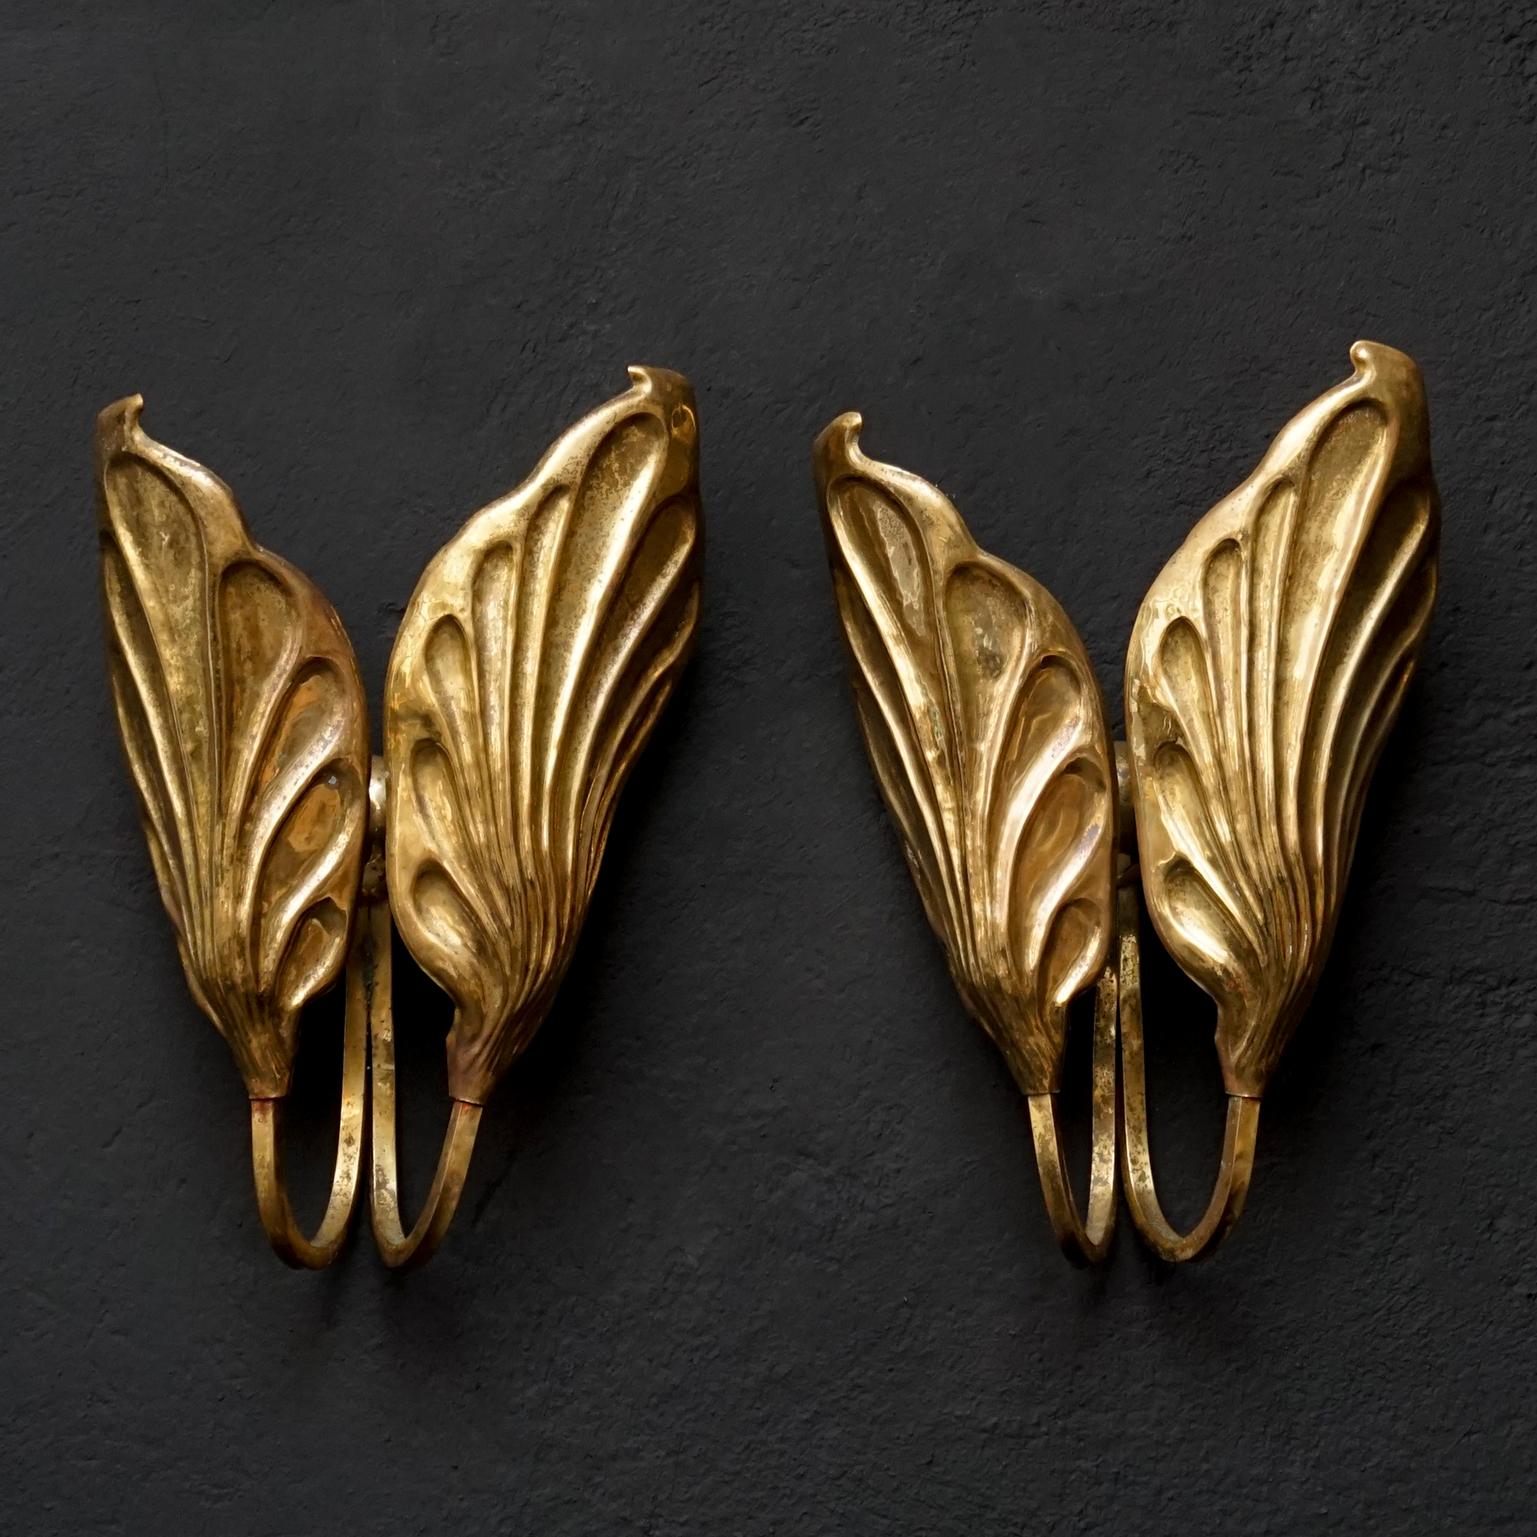 A pair of midcentury Italian hammered brass wall sconces by Carlo Giorgi for Bottega Gadda.
Each sconce consists of two hammered brass leaves covering bakelite light sockets.
The leaves are in original condition with very nice age appropriate